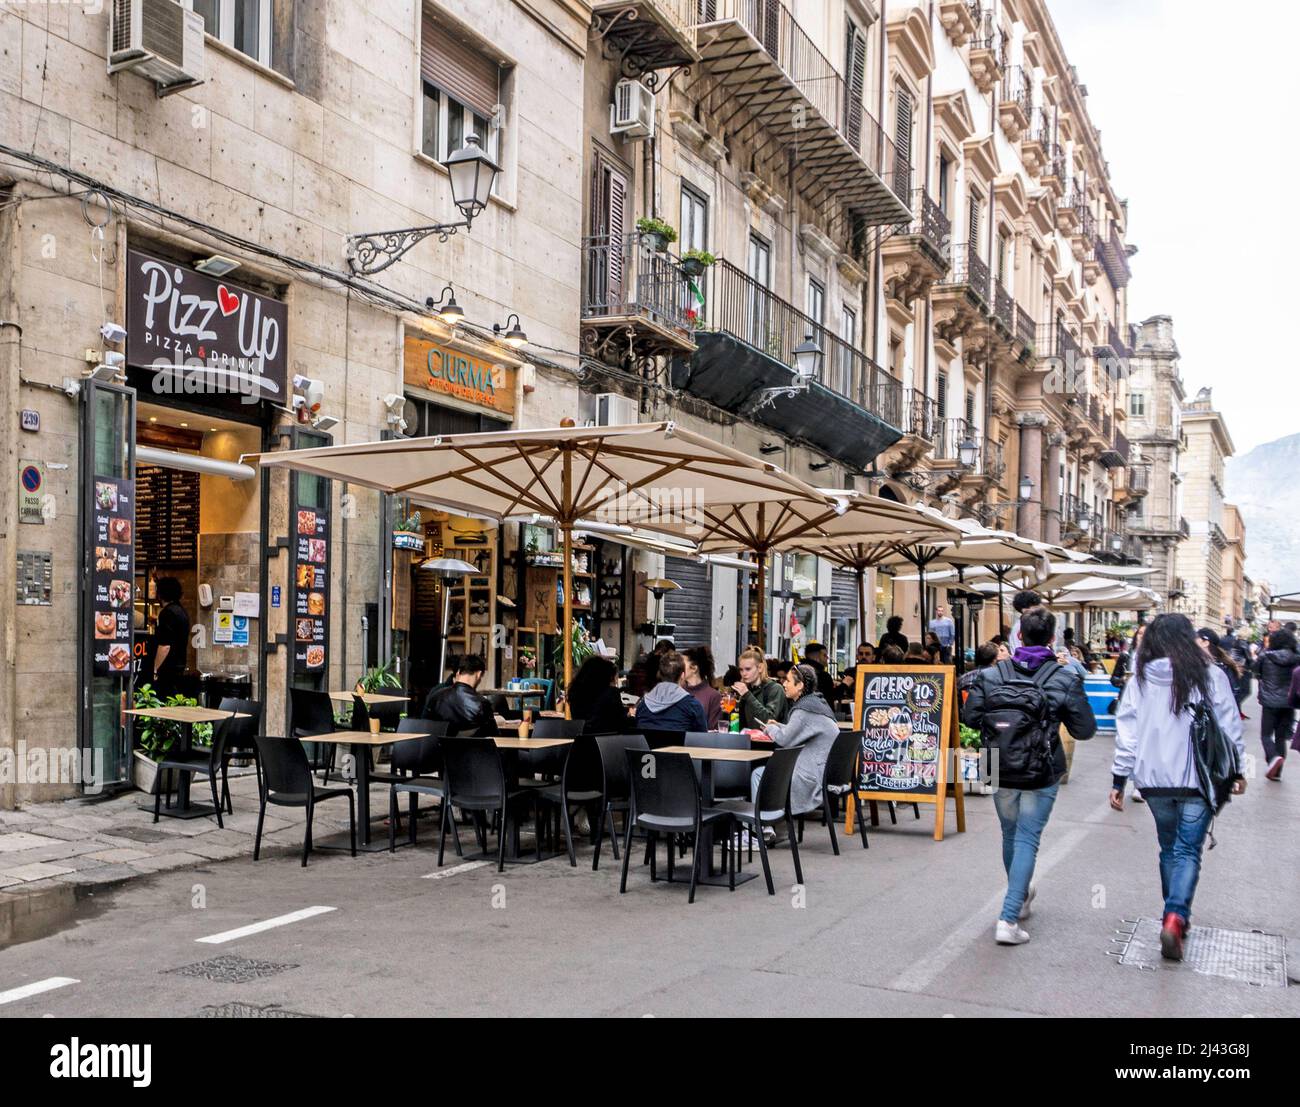 Outdoor dining along Via Maqueda, Palermo, Sicily, Italy. A pedestrianised street and a very popular street for outdoor dining and  shopping. Stock Photo